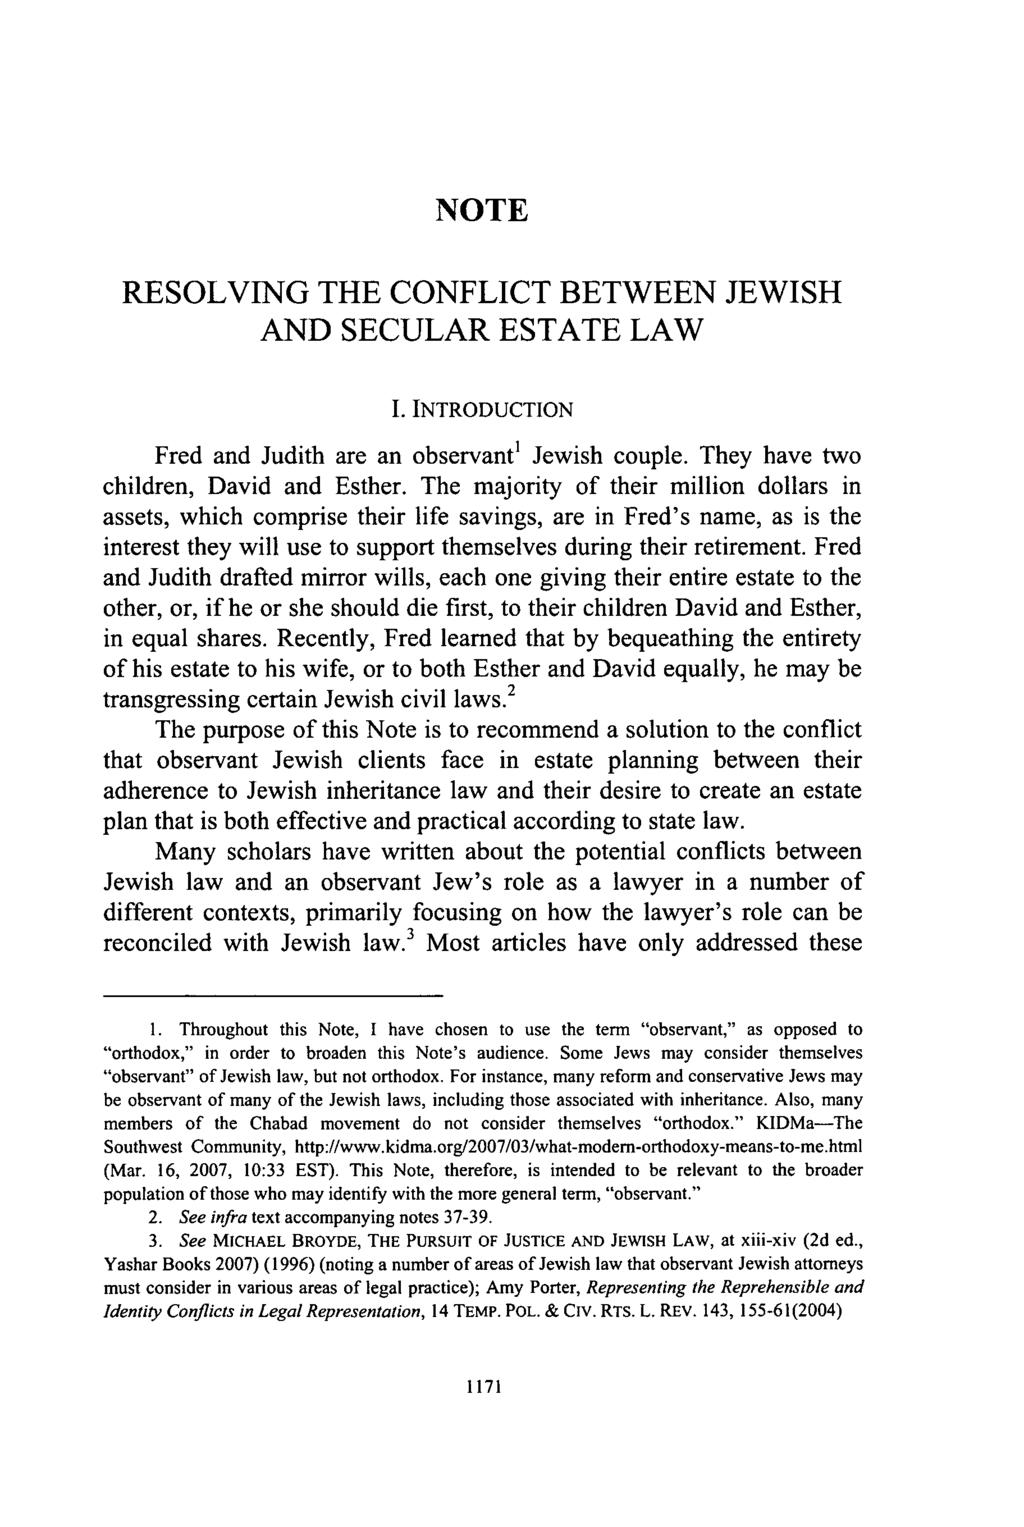 Wolf: Resolving the Conflict Between Jewish and Secular Estate Law NOTE RESOLVING THE CONFLICT BETWEEN JEWISH AND SECULAR ESTATE LAW I. INTRODUCTION Fred and Judith are an observant 1 Jewish couple.